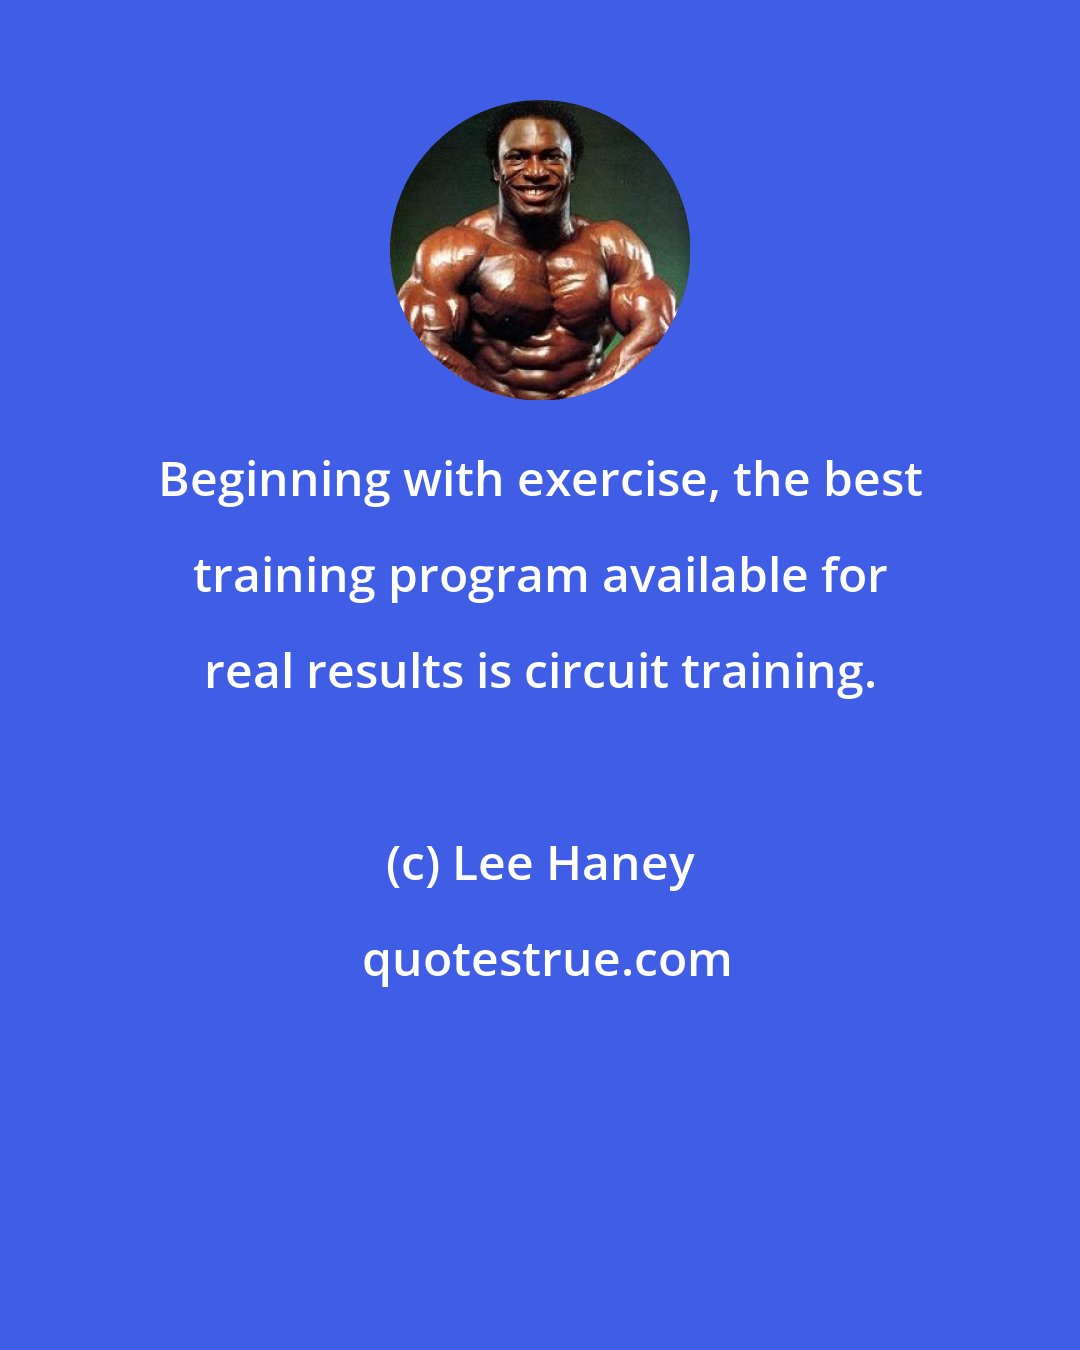 Lee Haney: Beginning with exercise, the best training program available for real results is circuit training.